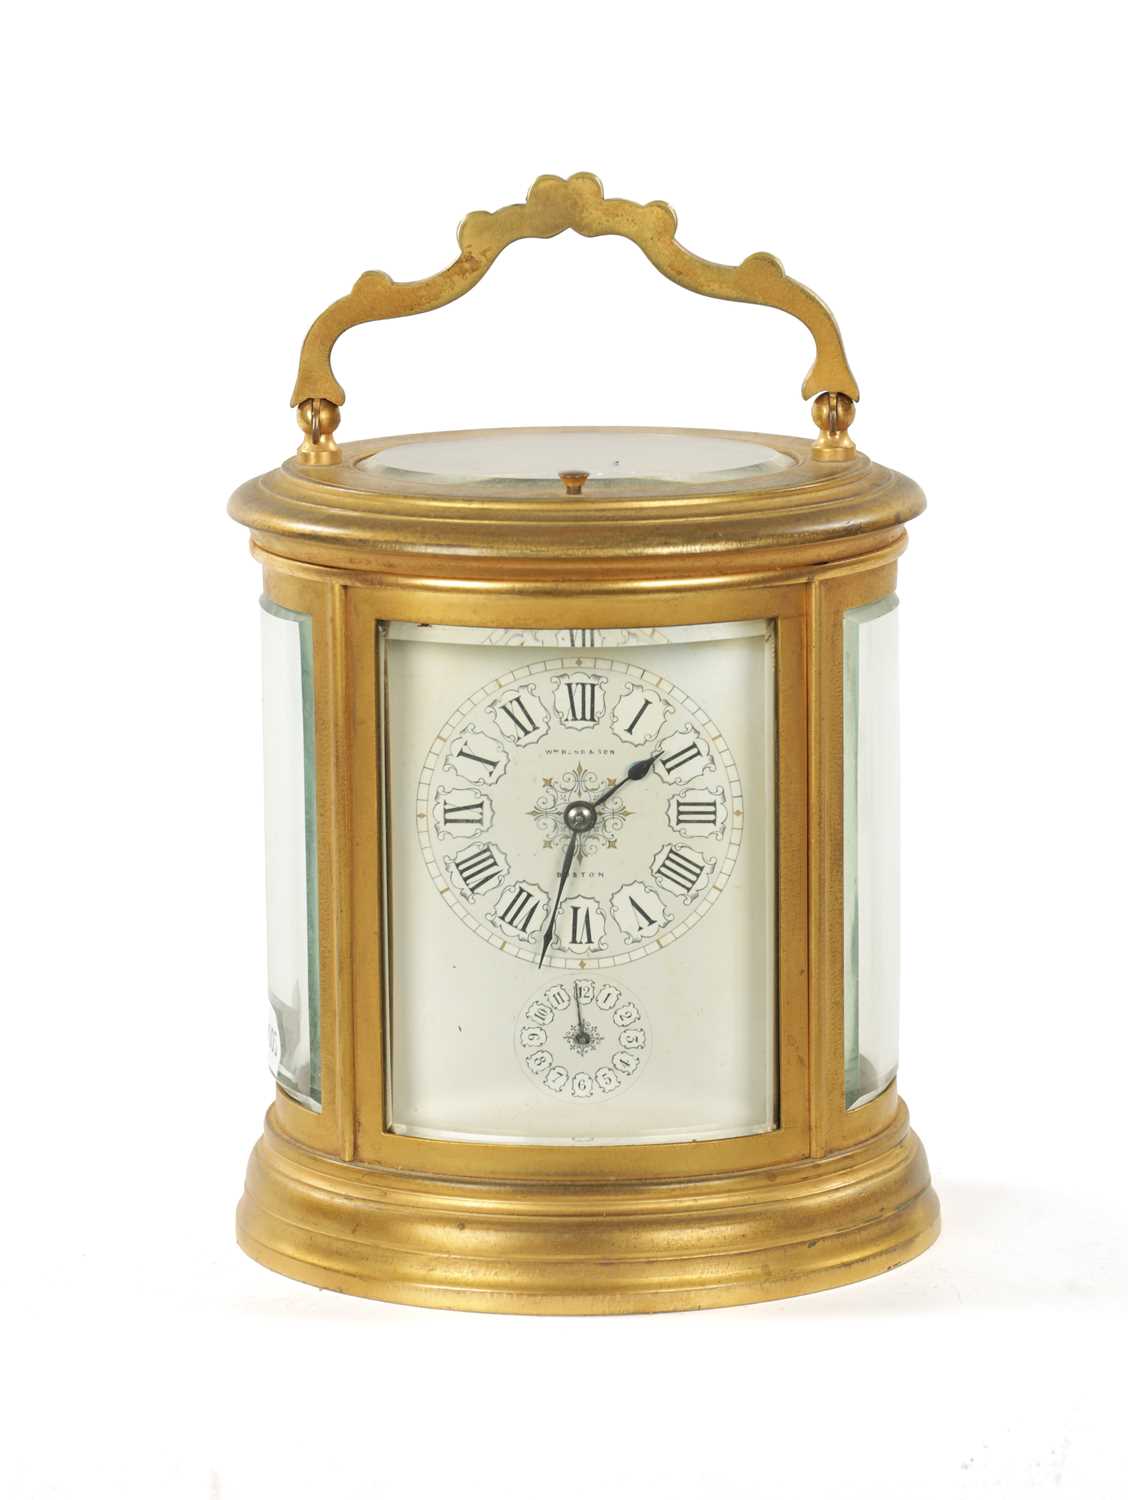 RICHARD ET CIE, PARIS. A LARGE LATE 19TH CENTURY FRENCH OVAL REPEATING CARRIAGE CLOCK